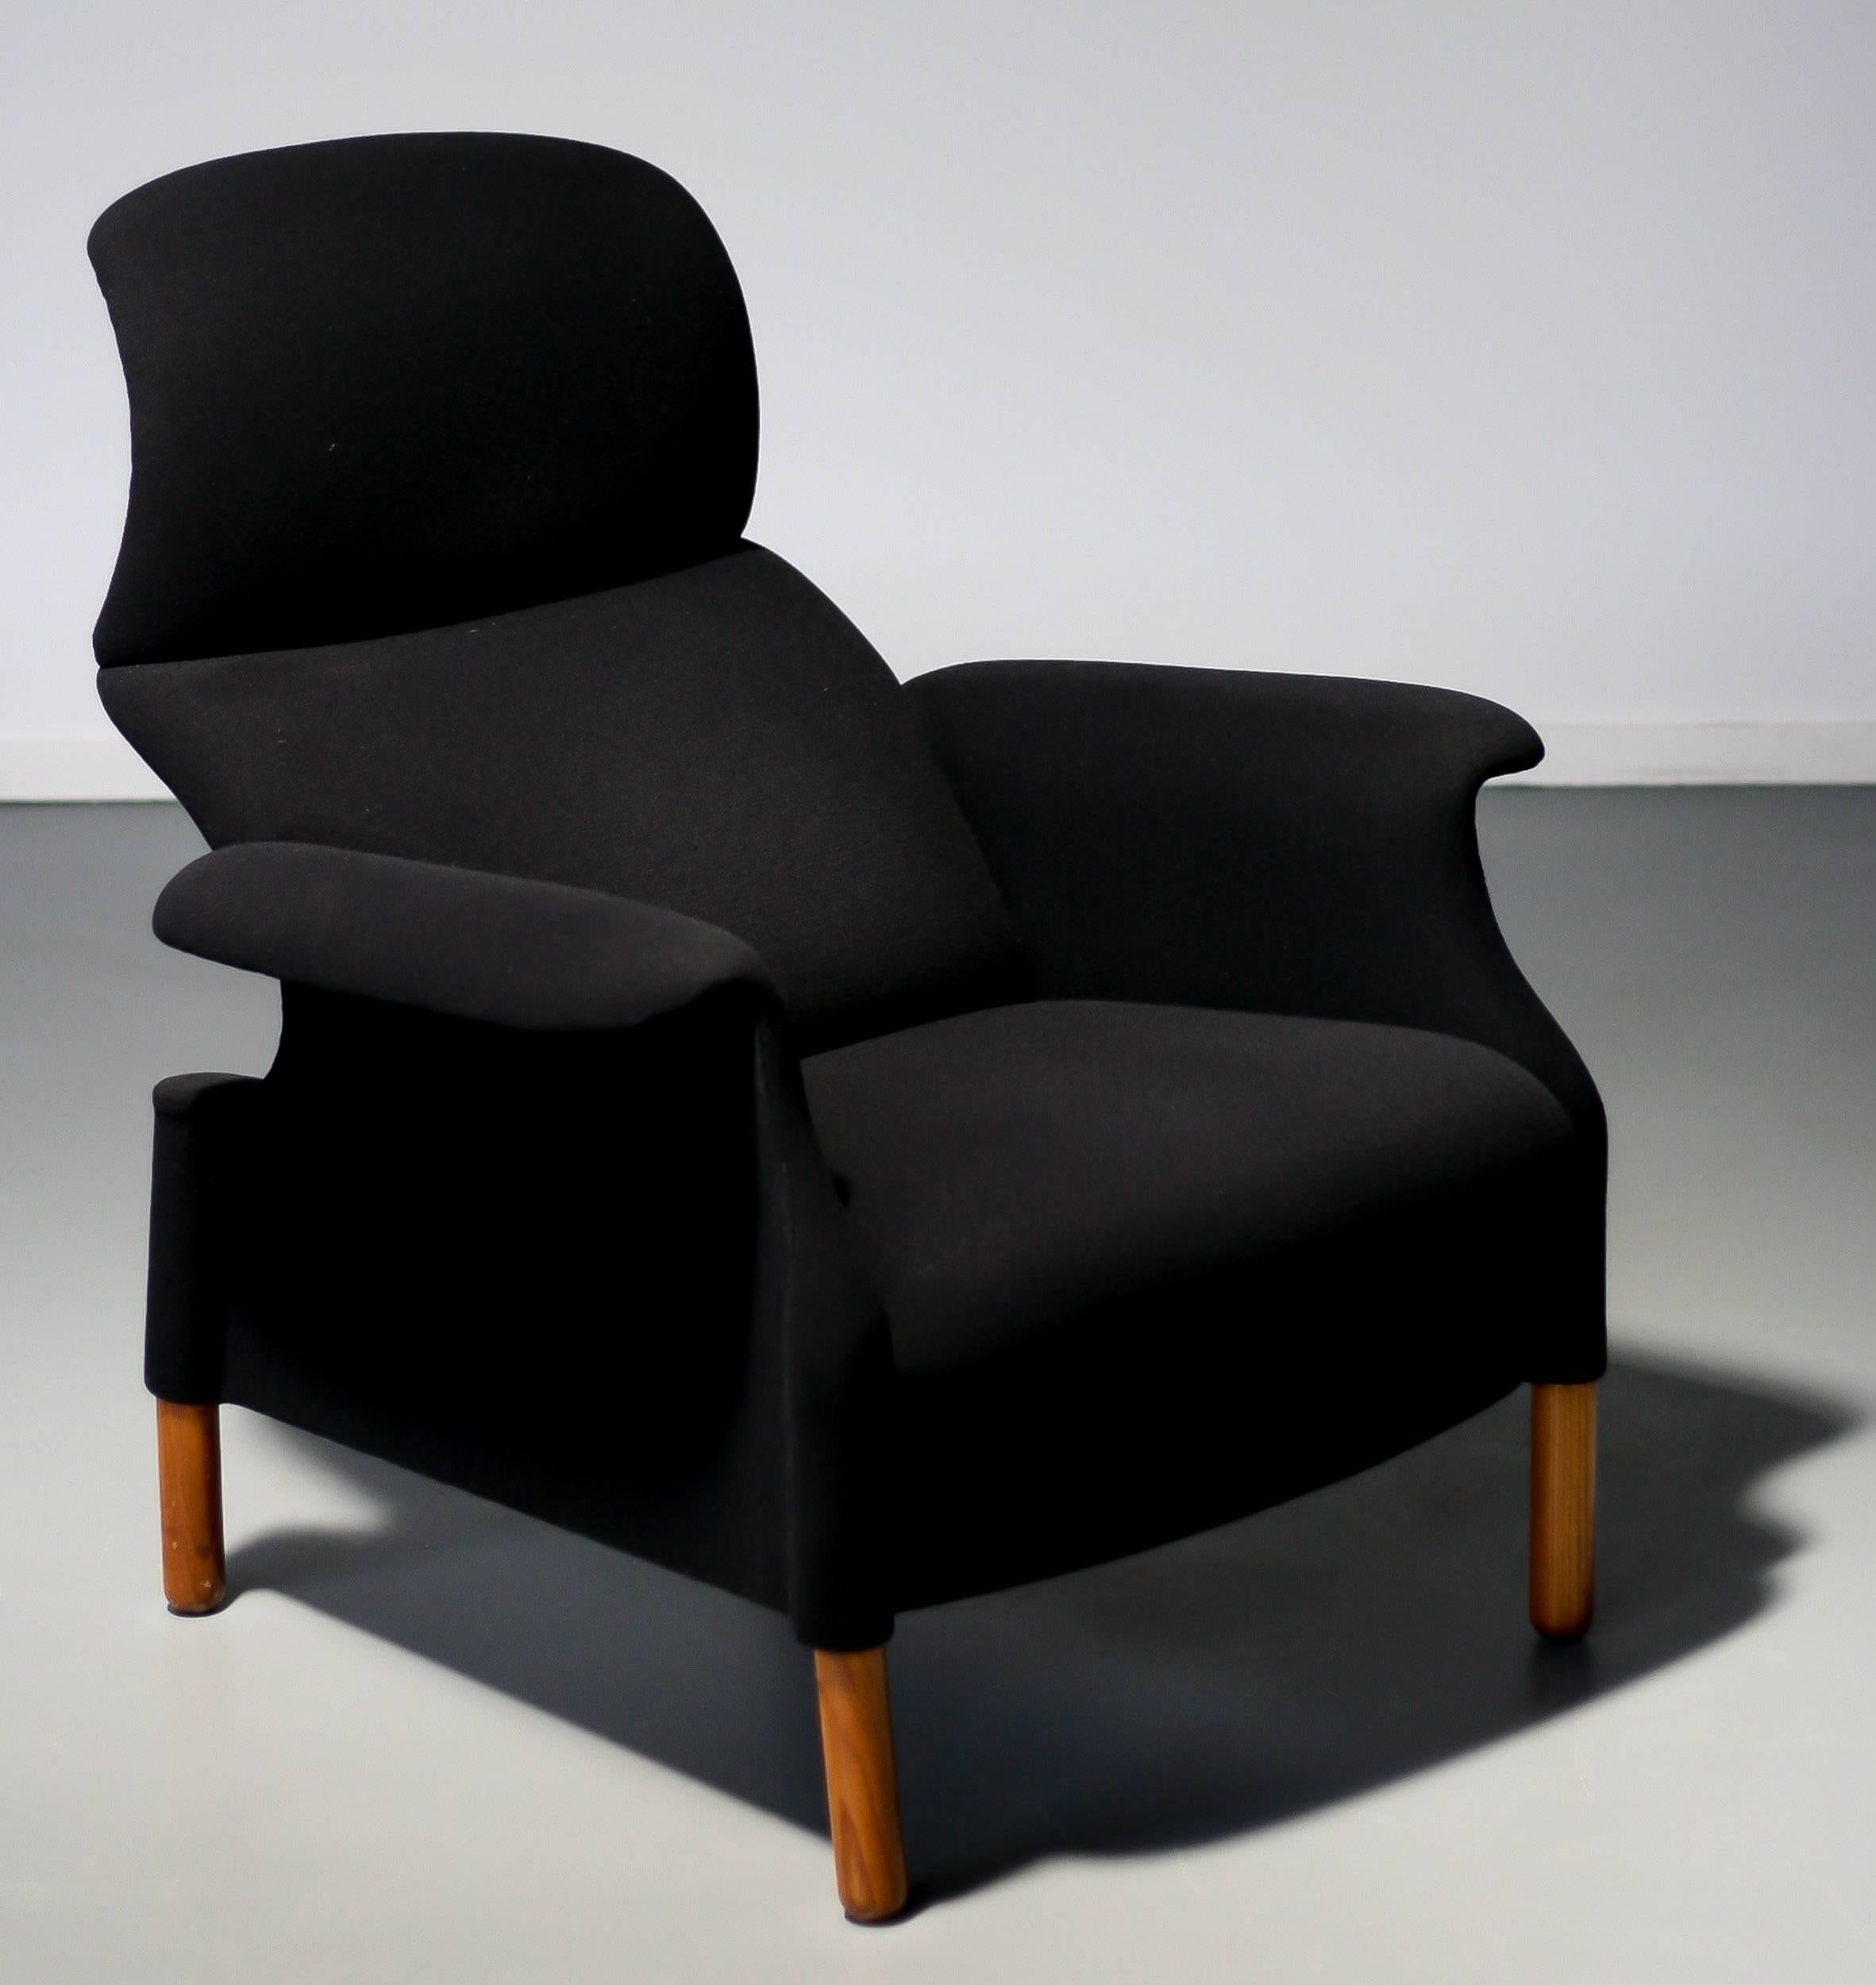 Early Achille Castiglioni San Luca chair manufactured by Gavina.
Original black wool felt upholstery in excellent condition, oak legs.


   